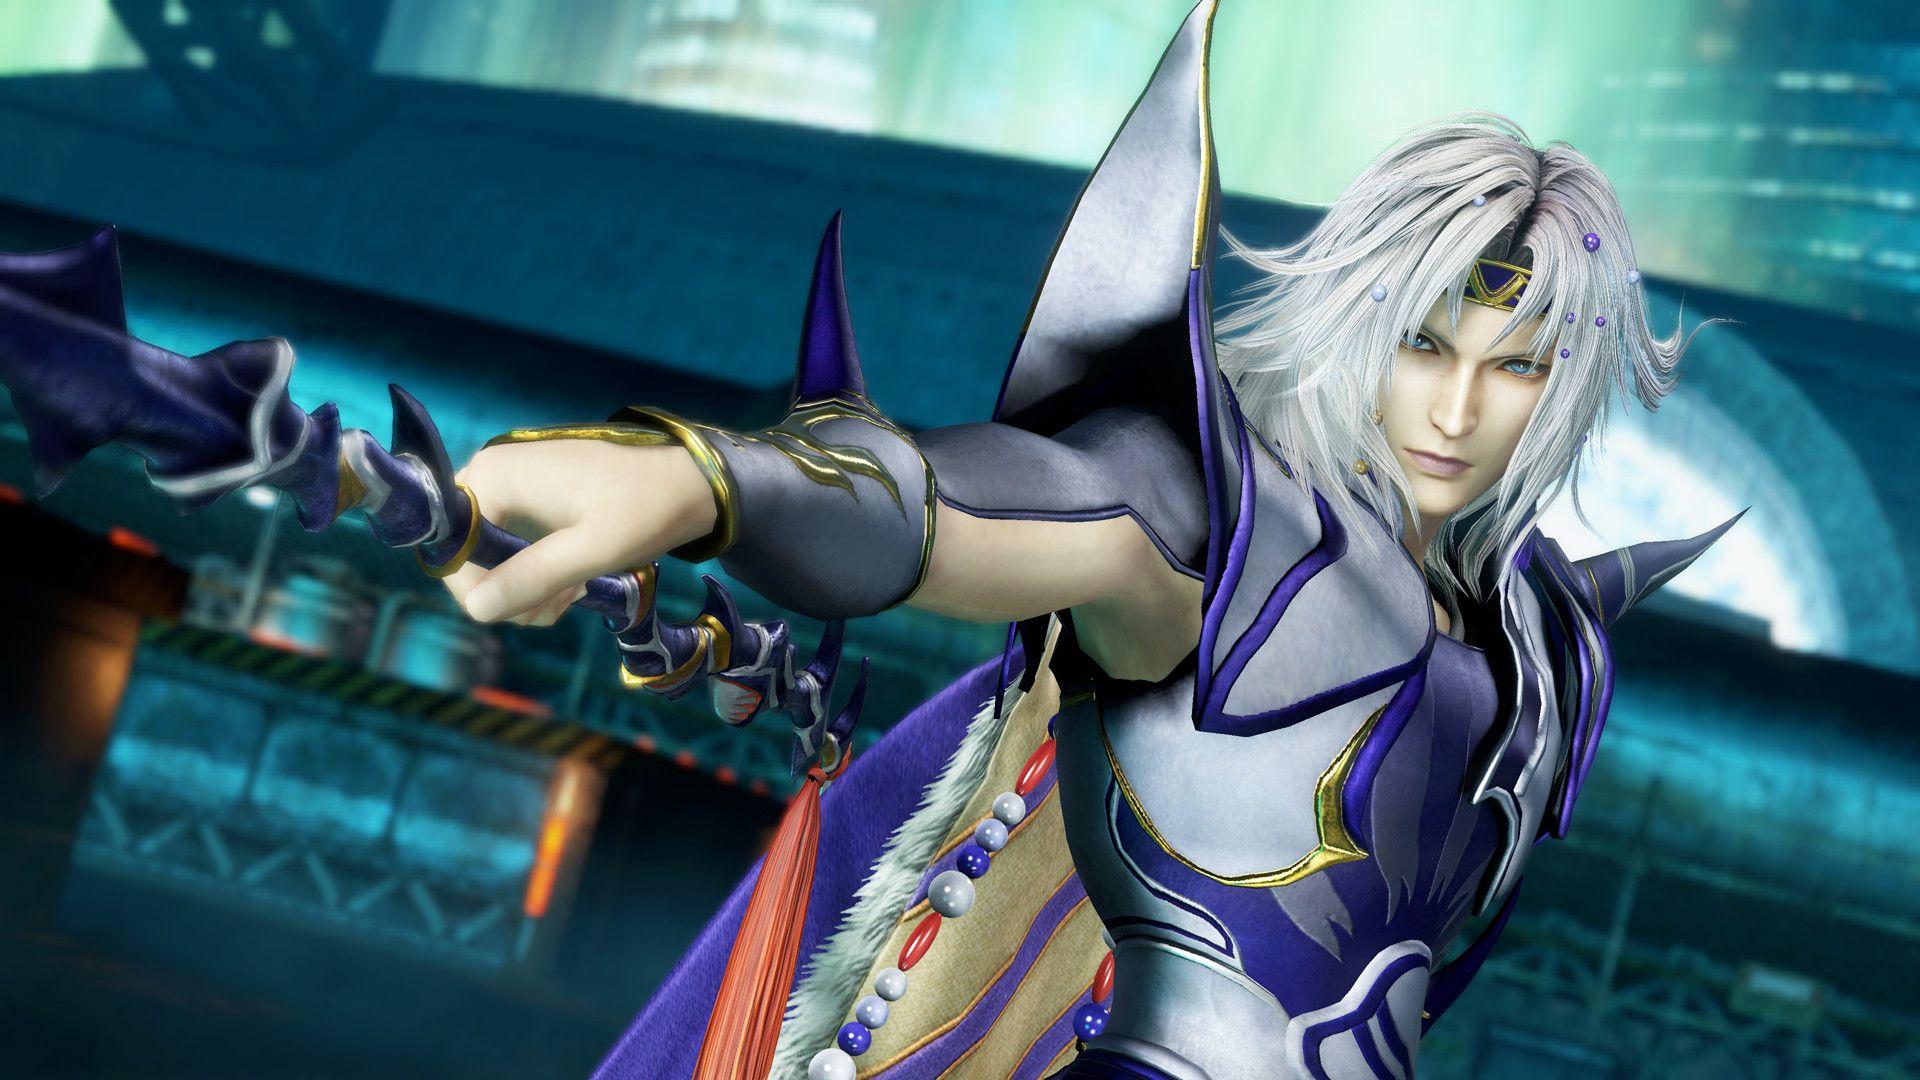 Kefka beats Sephiroth to become the first villain in Dissidia Final